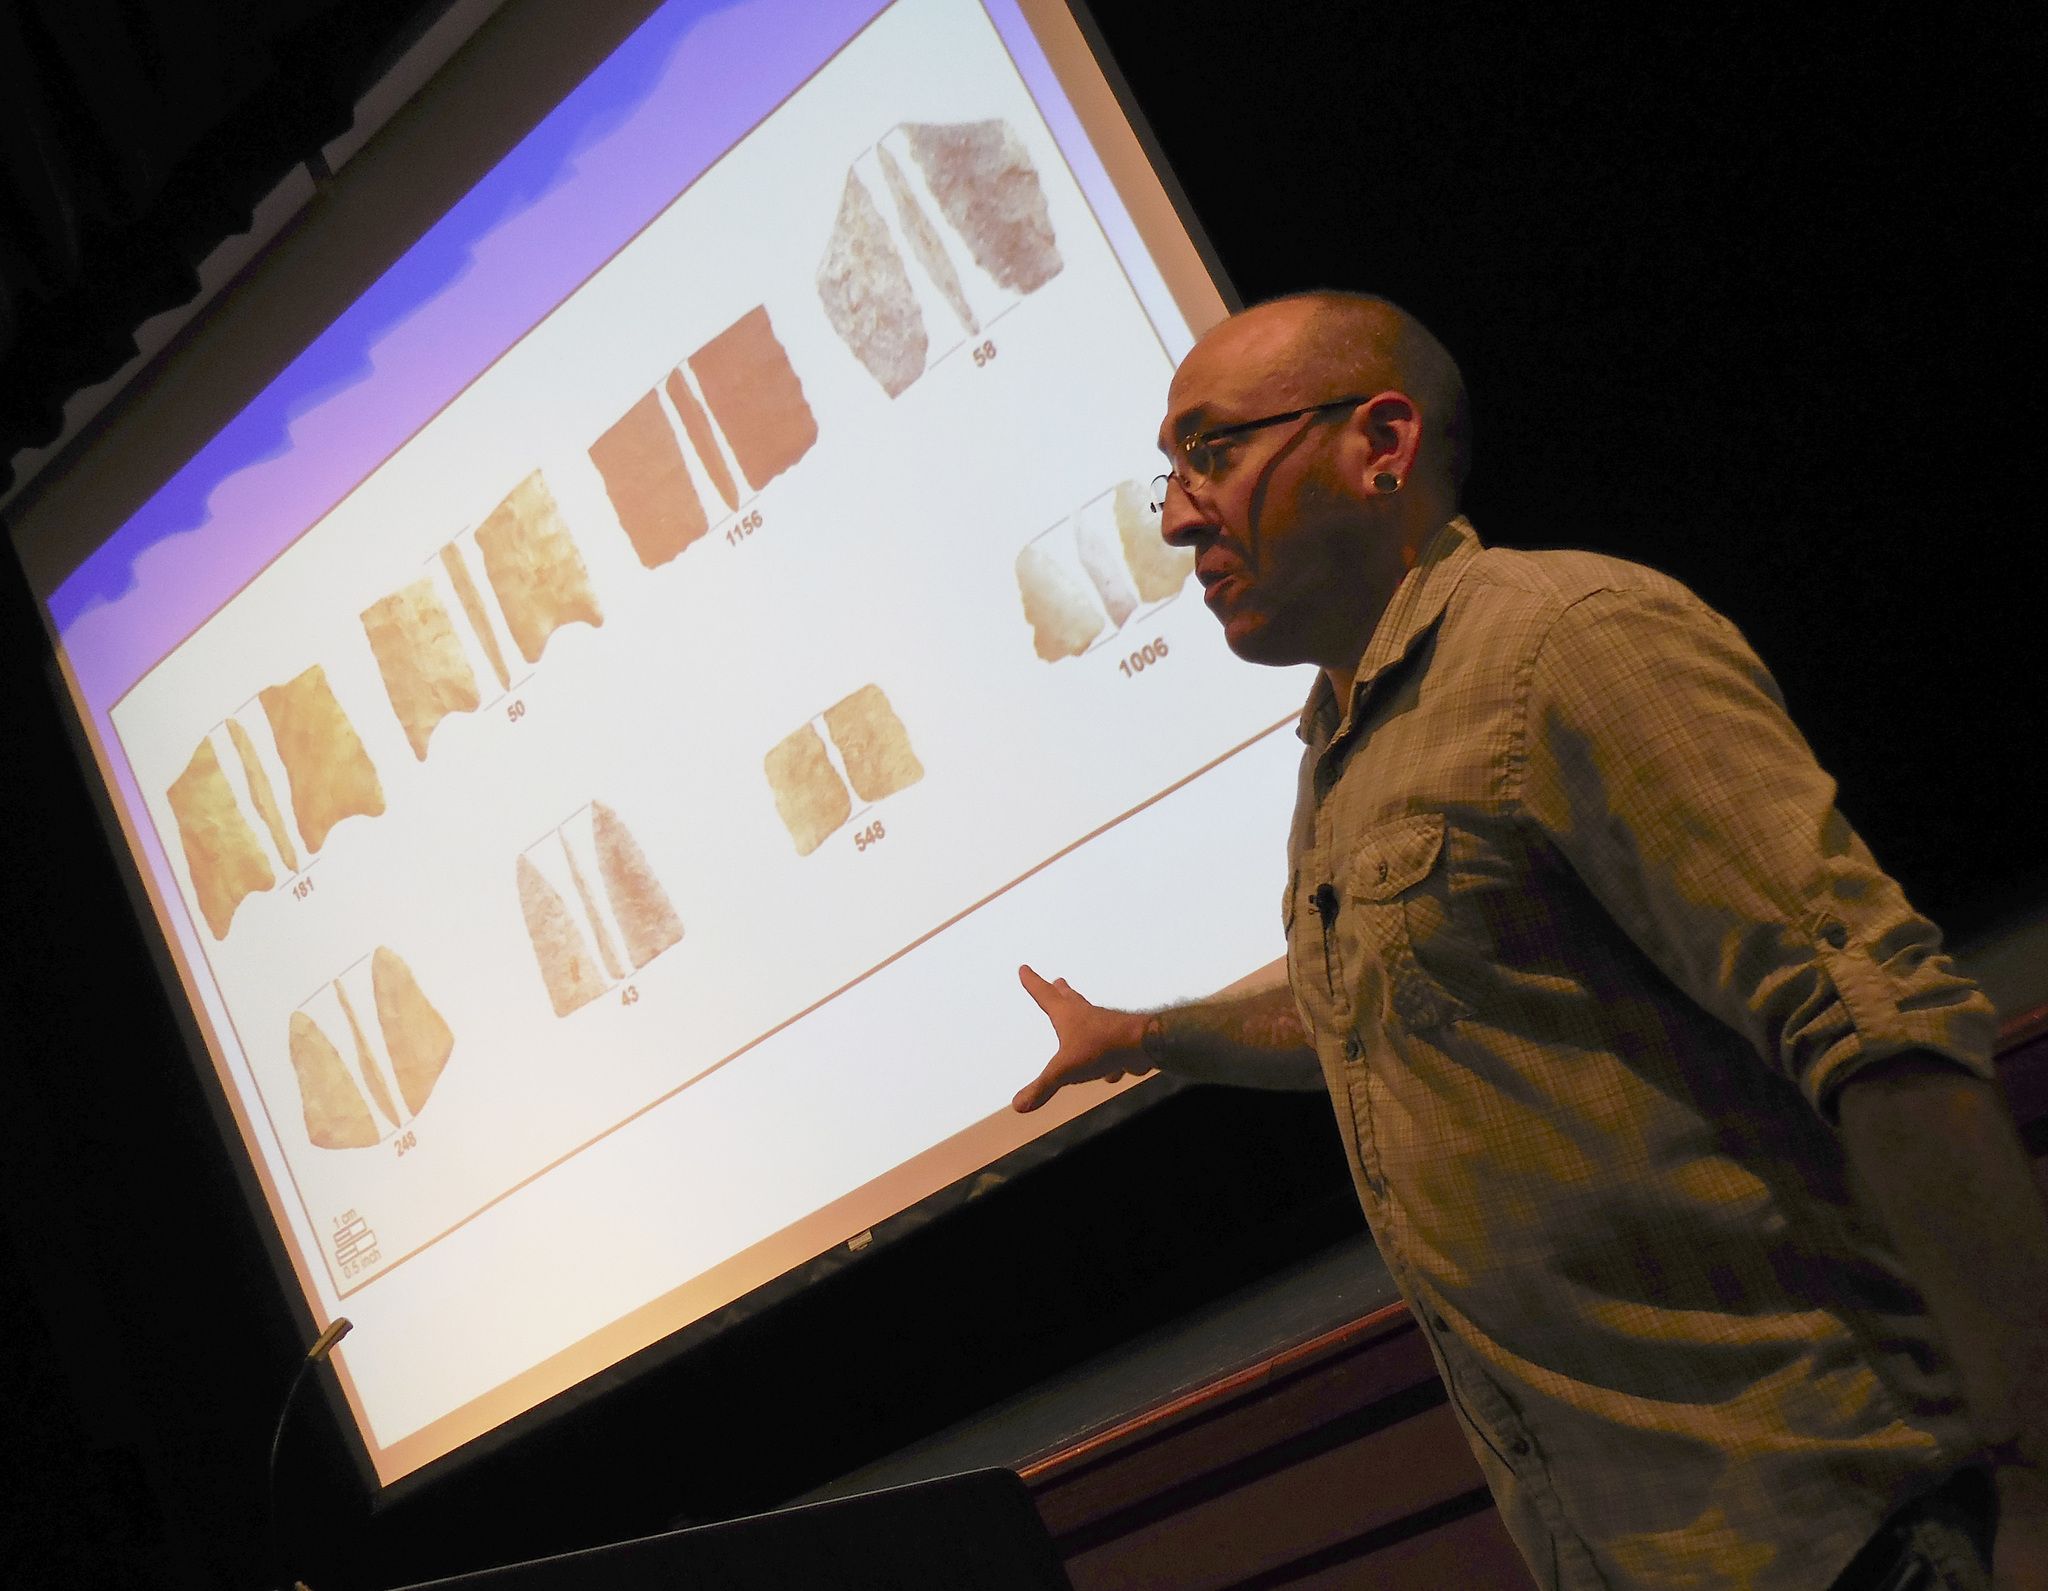 With a photo of parts of 10,000-year-old stone tools on the screen behind him, Dr. Robert Kopperl discusses the major find in Redmond at a 2015 meeting. Reporter file photo